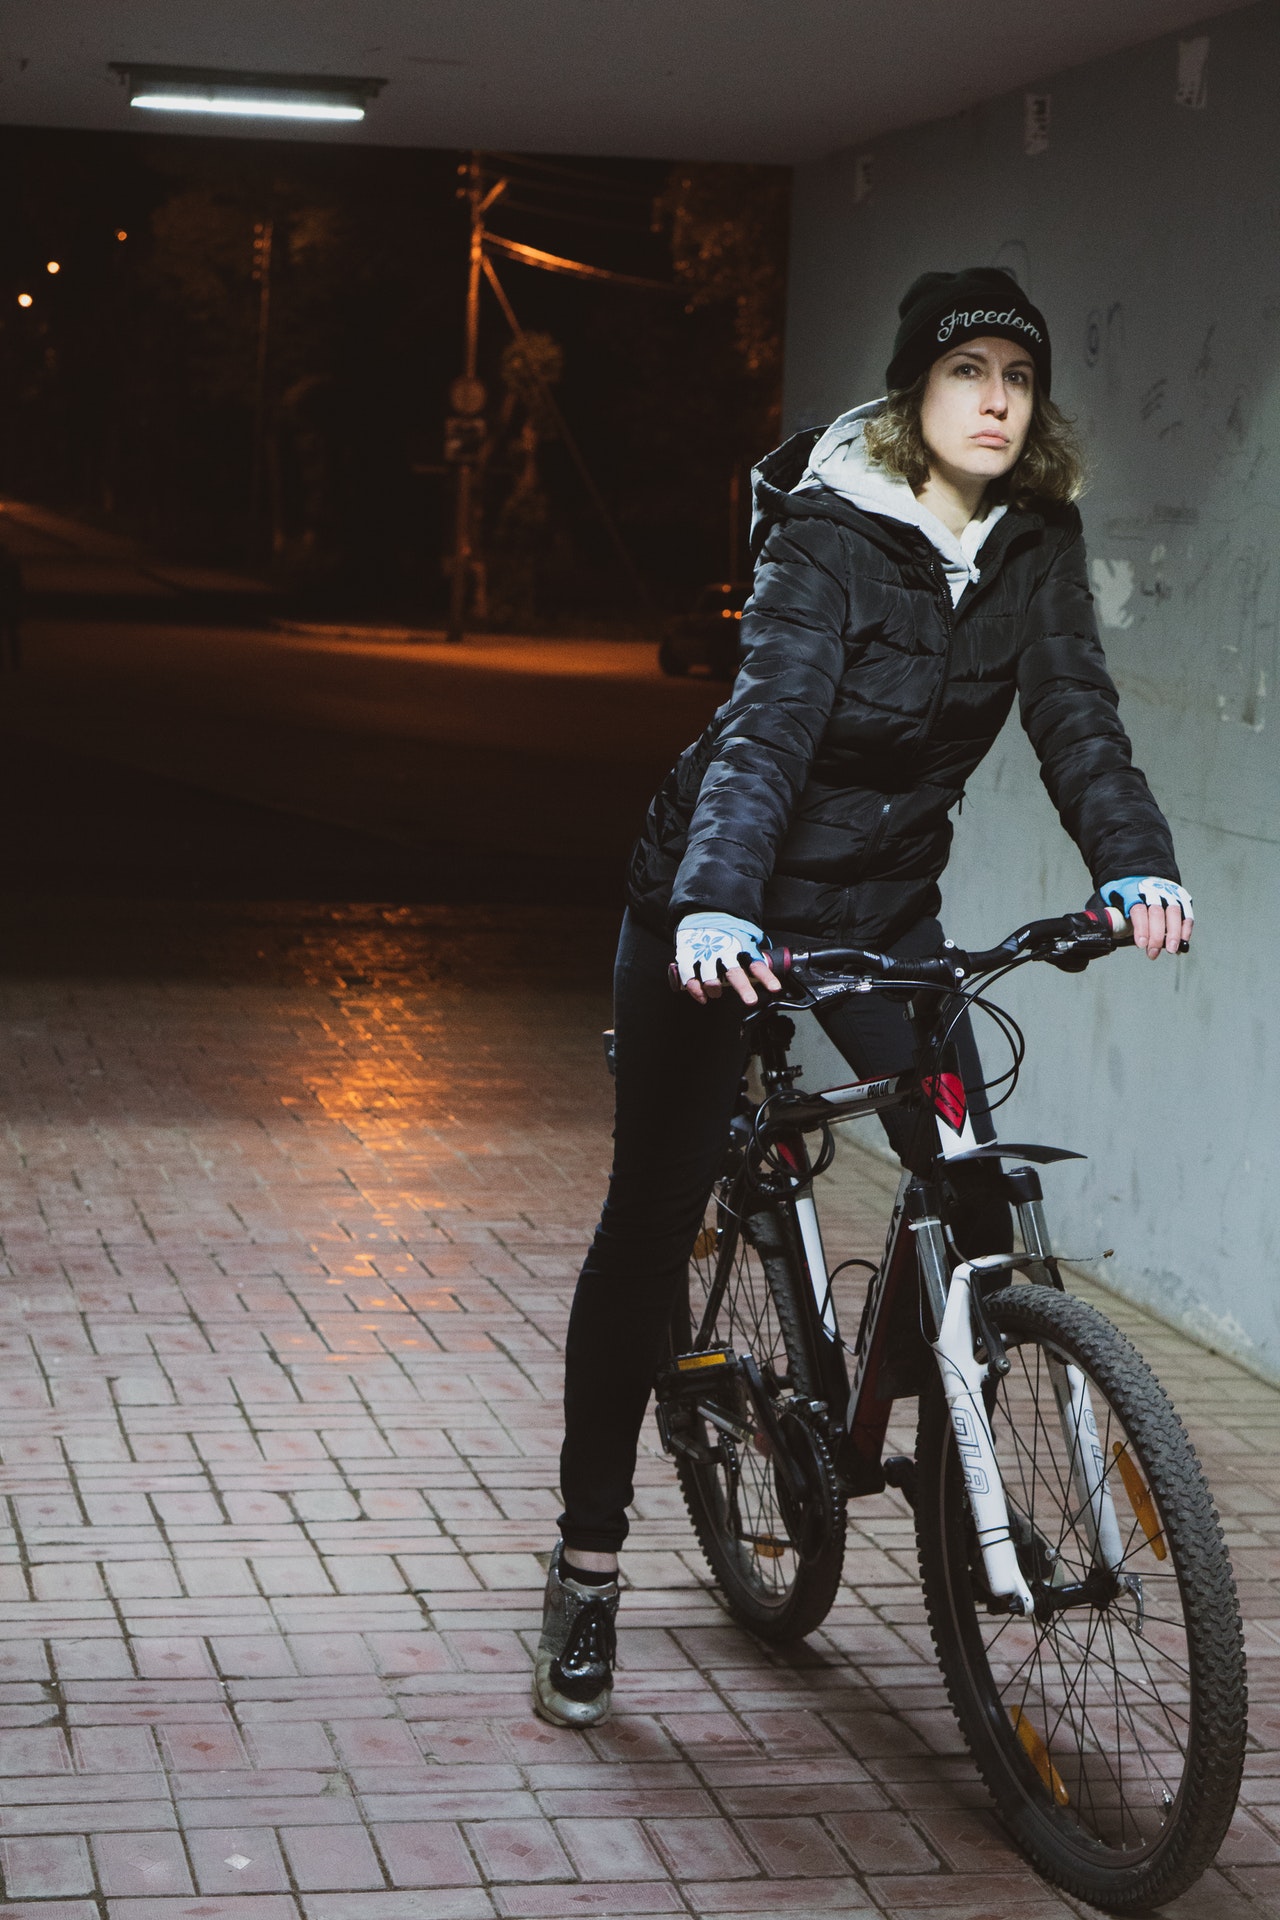 Woman on bicycle at night wearing a parka and beanie, riding a bicycle